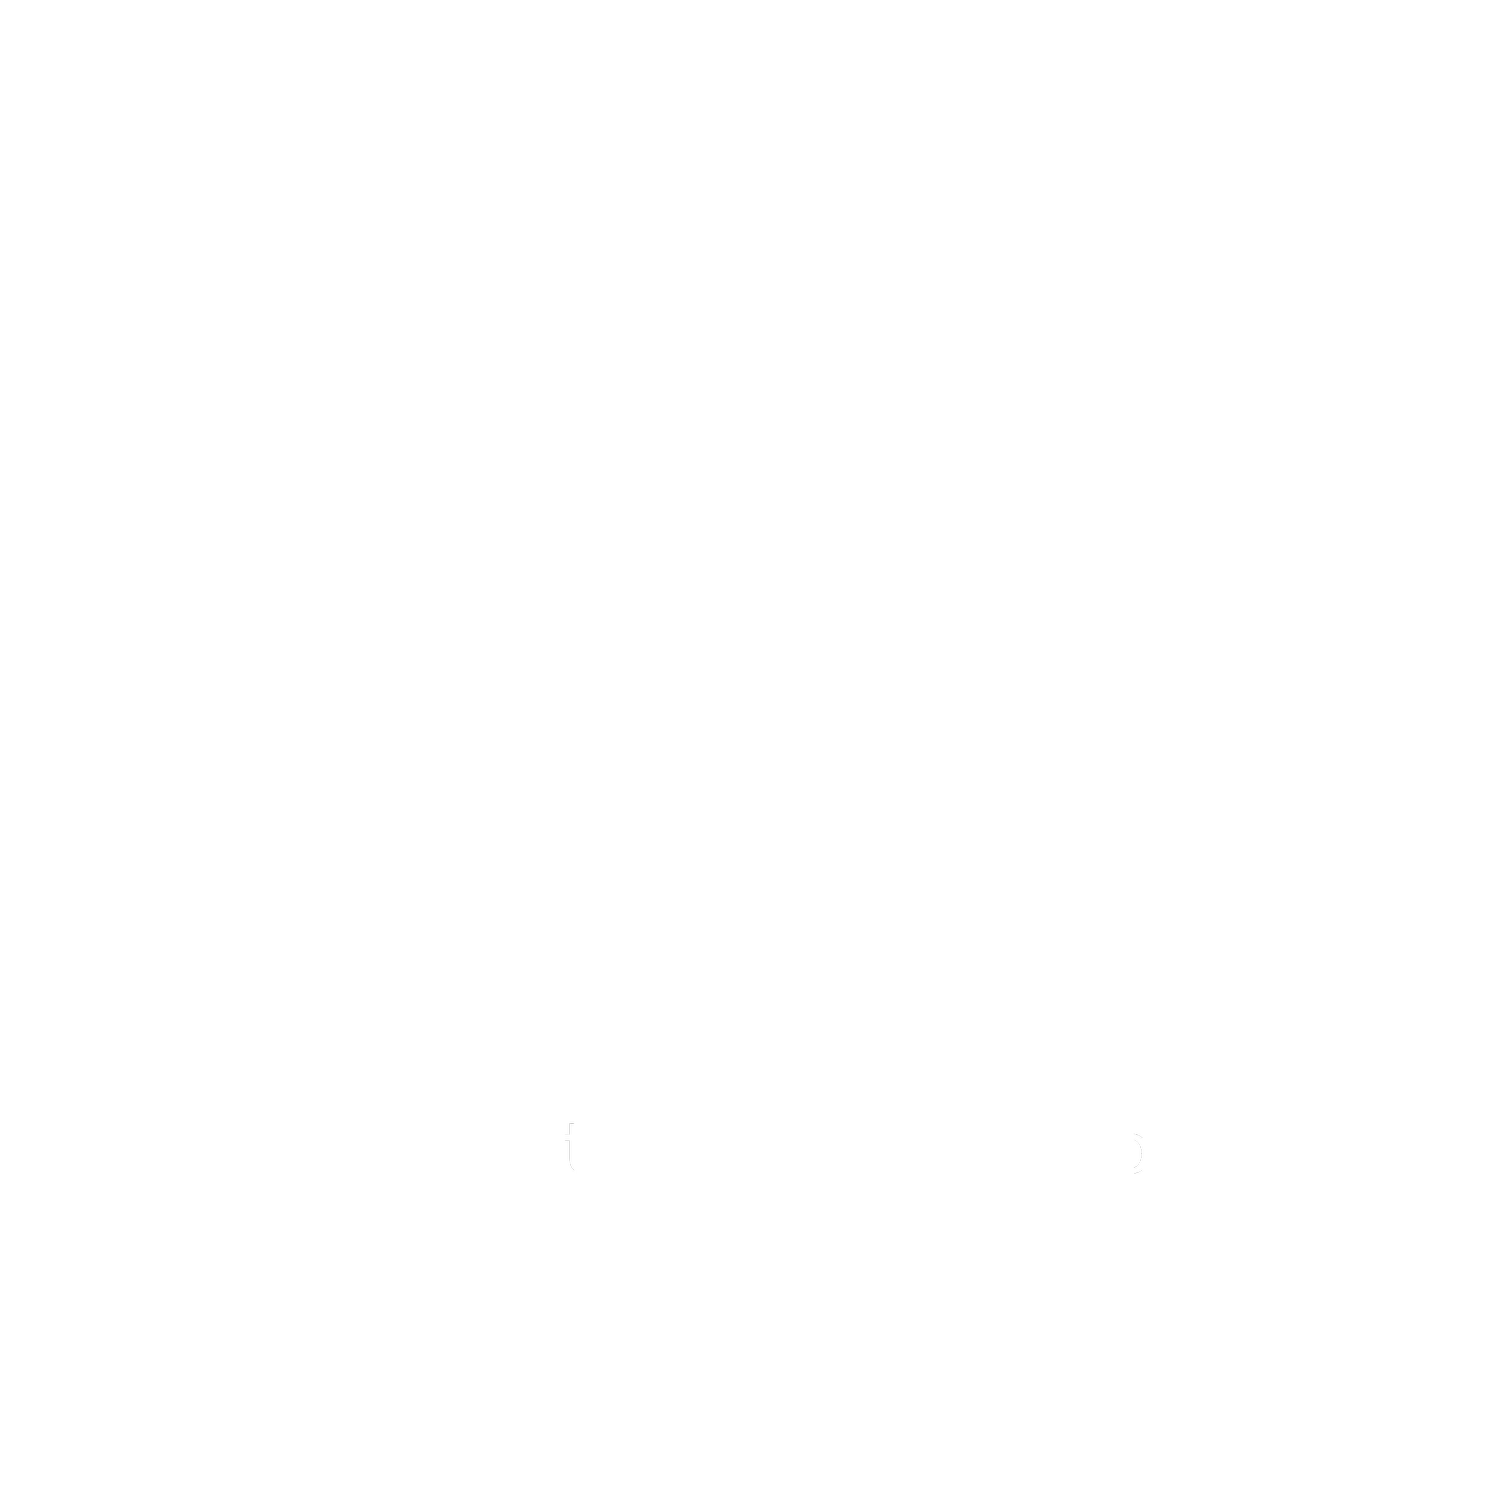    Artifacture Labs